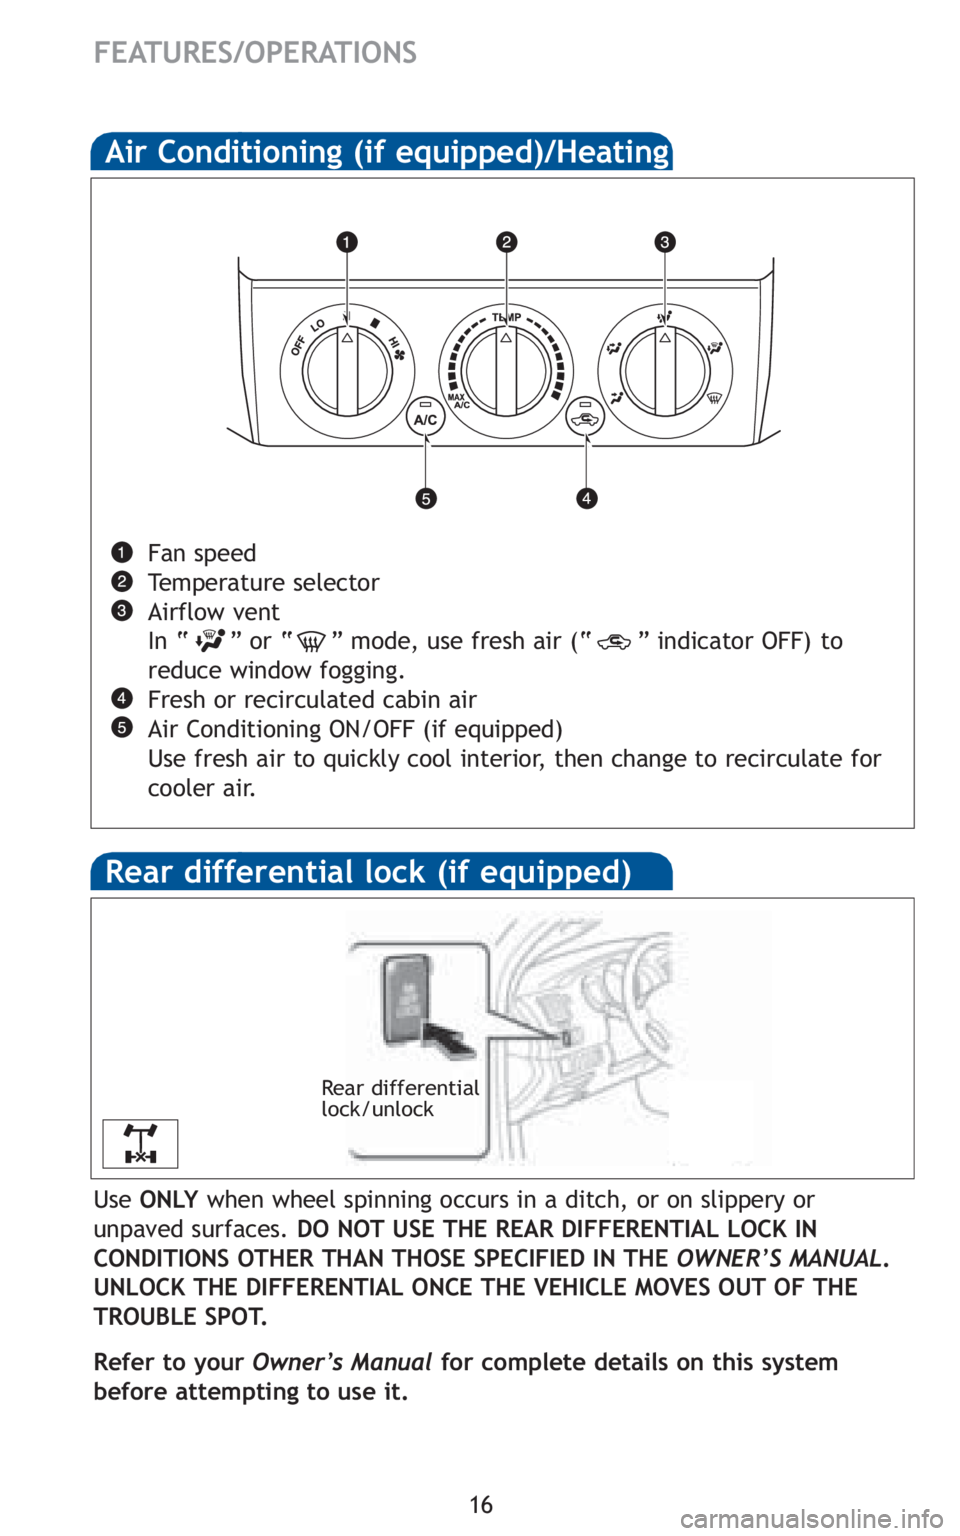 TOYOTA TACOMA 2010  Owners Manual (in English) 16
FEATURES/OPERATIONS
Air Conditioning (if equipped)/Heating 
Fan speed
Temperature selector
Airflow vent
In “ ” or “ ” mode, use fresh air (“ ” indicator OFF) to
reduce window fogging.
F